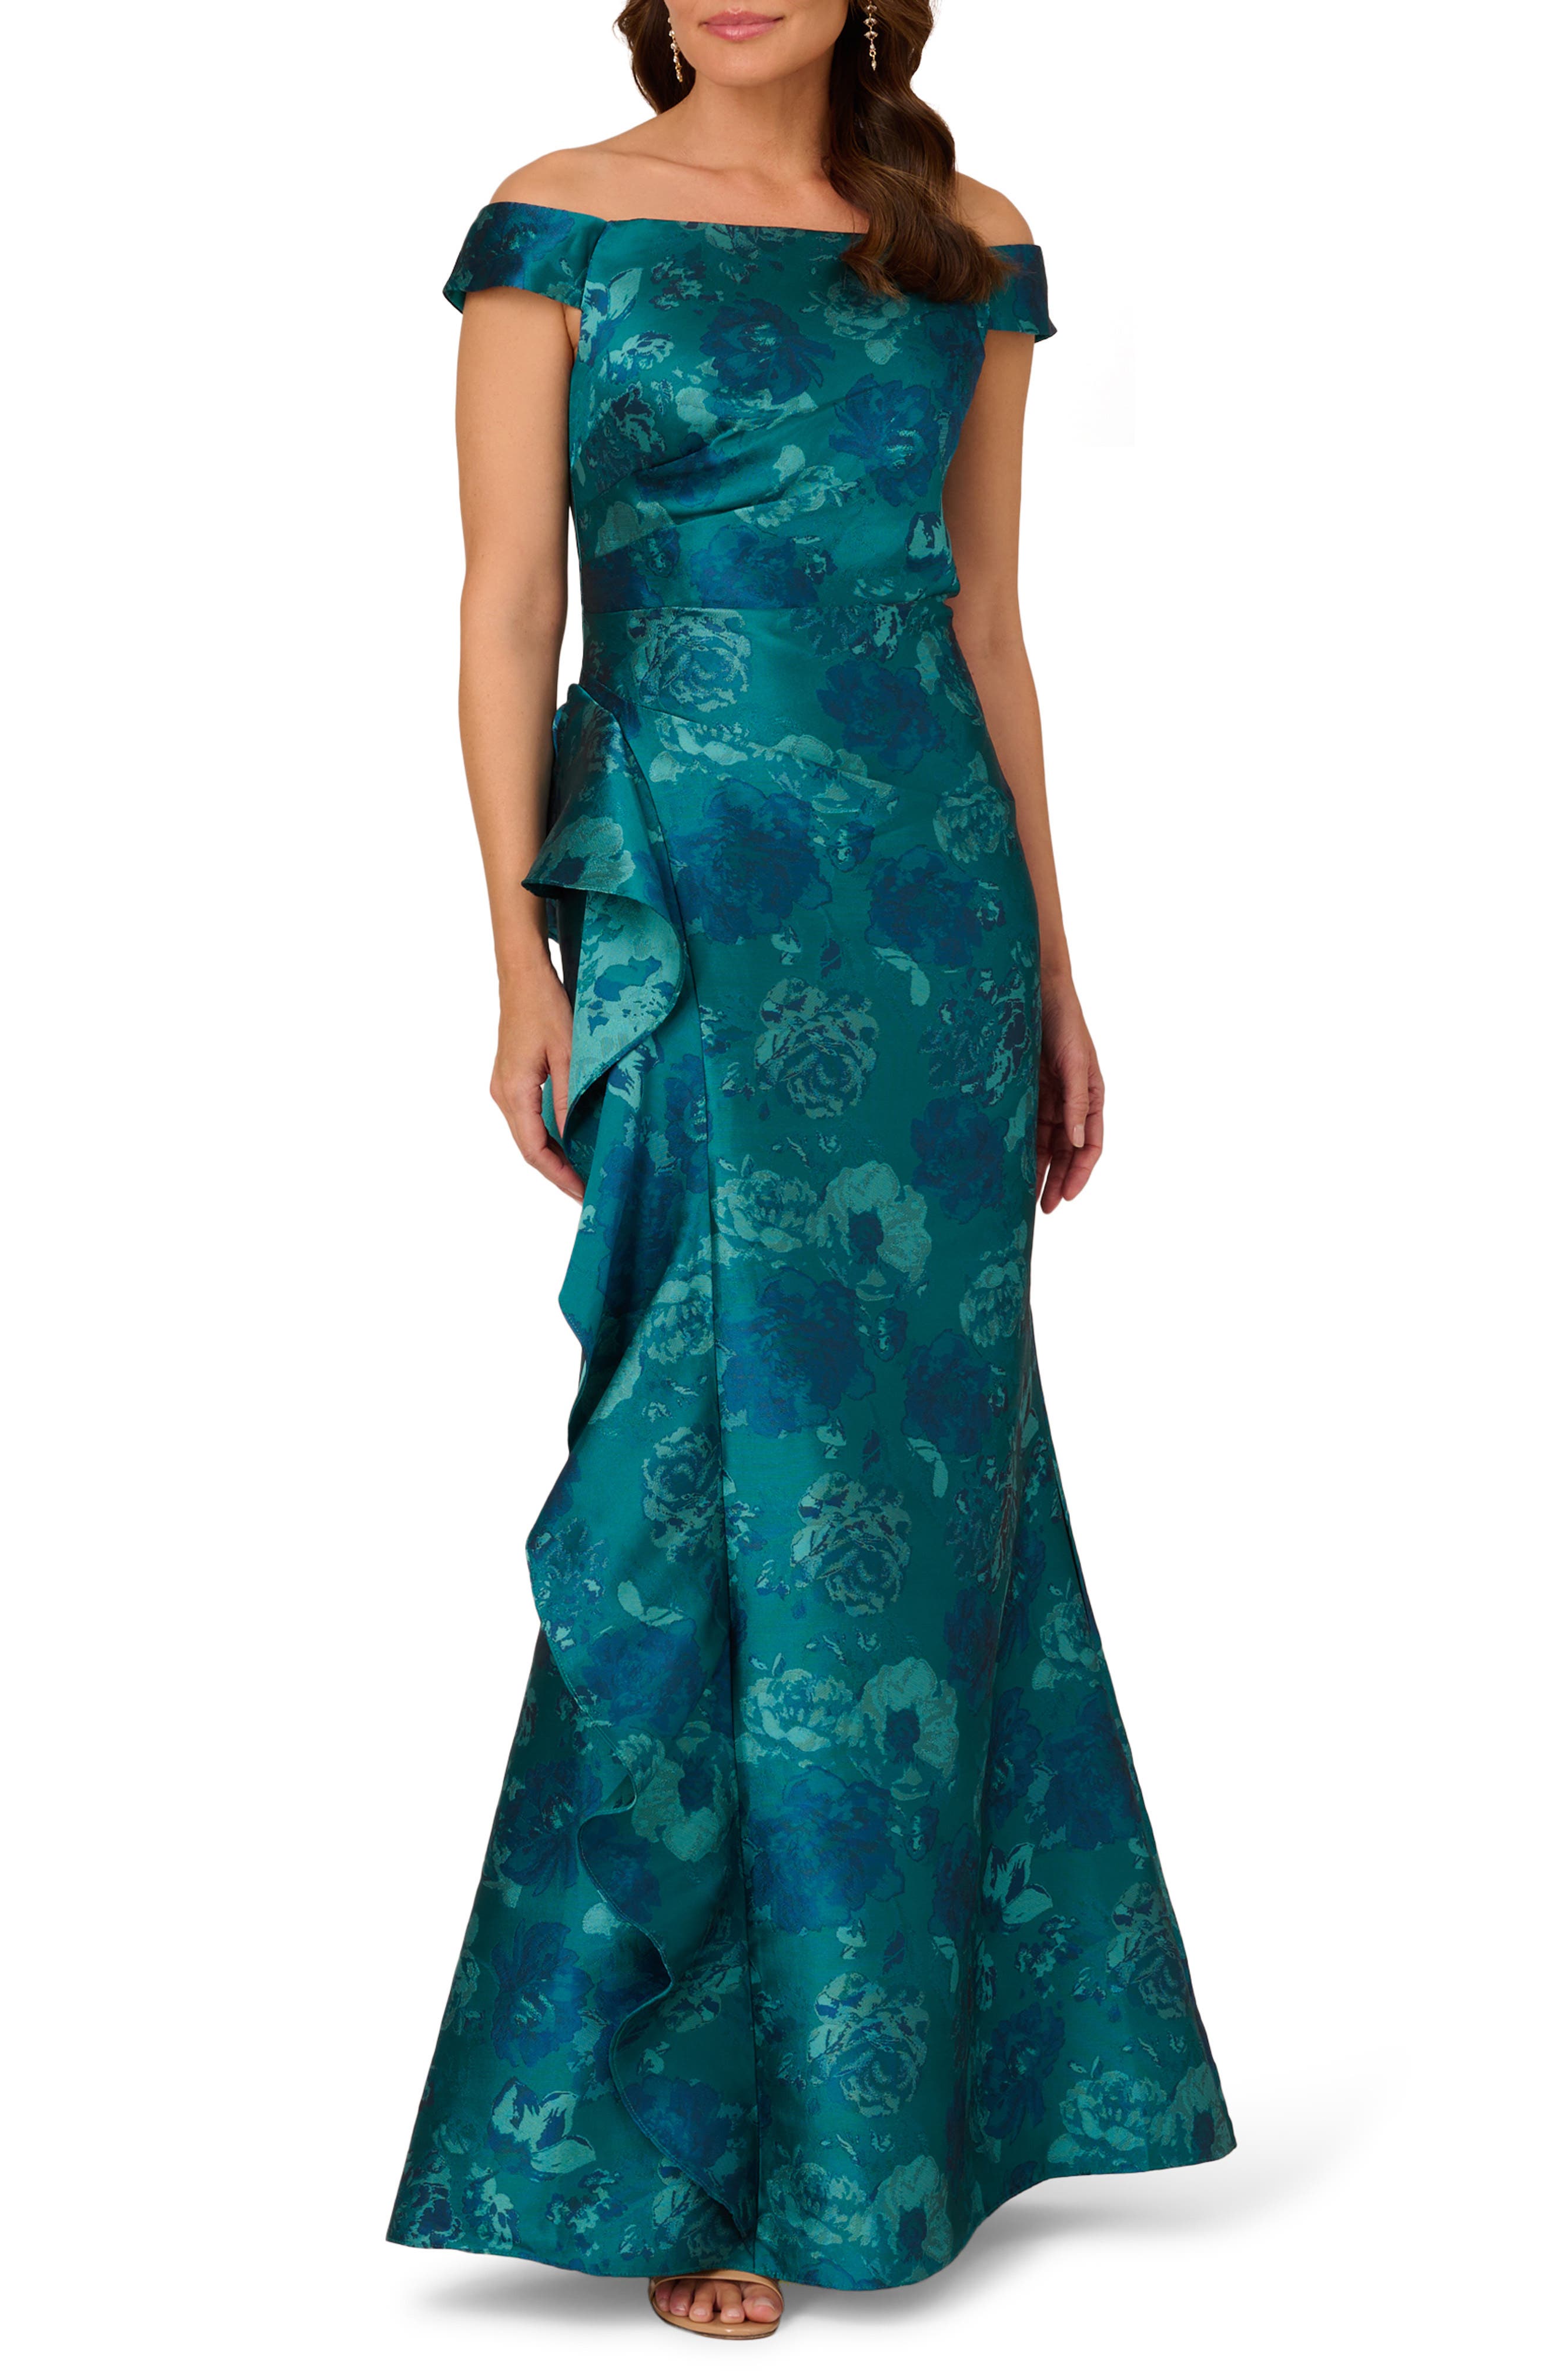 Floral Jacquard Sleeveless Midi Dress With Cutout Back In Teal Multi